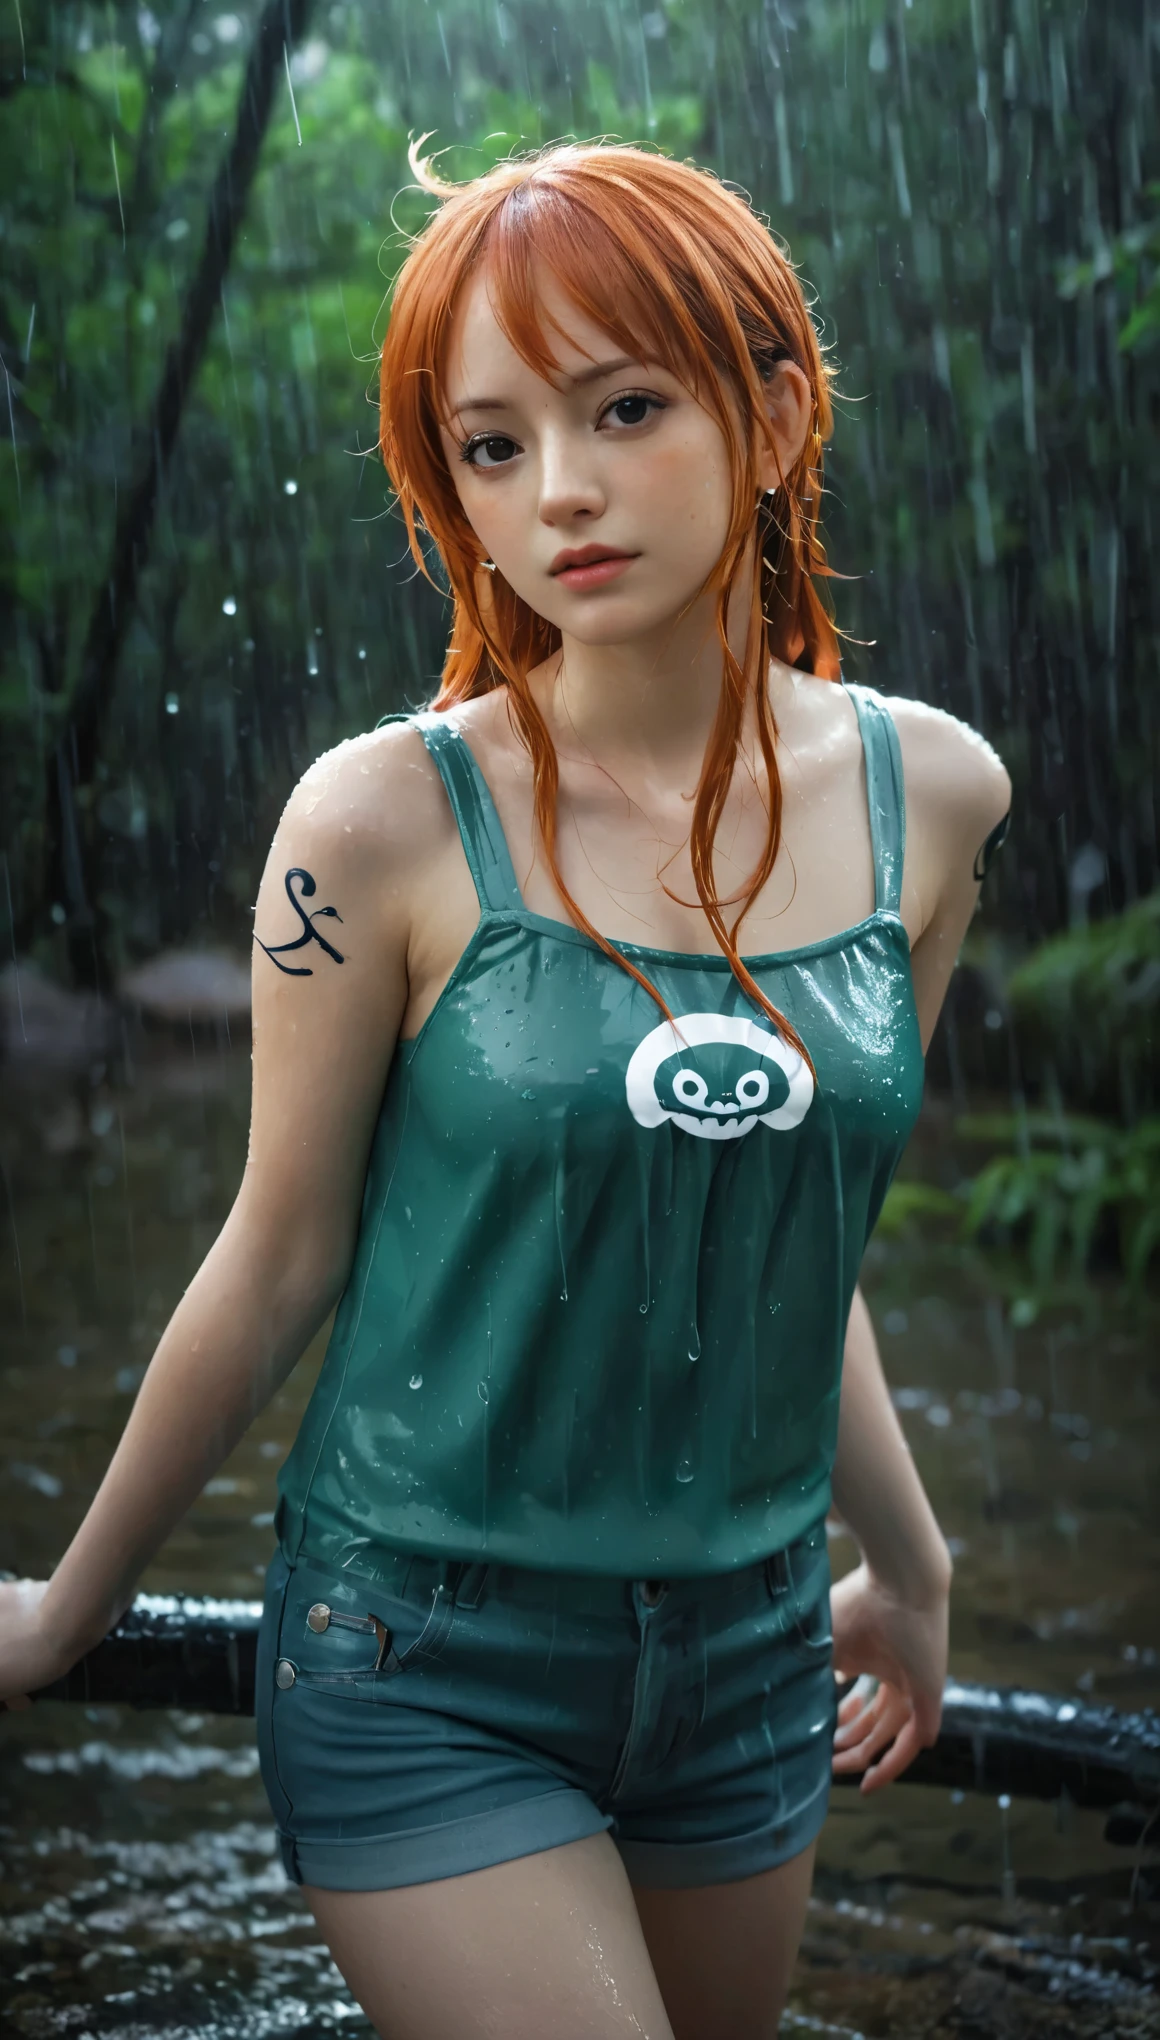 (Masterpiece:1.2, Best Quality), Forest, 1 girl, girl, Redhead, , Thinking, nami one piece, raining, fullbody, action pose, beutifull face, beautifull body, ultra detail face, very detail, ultra hidgh res, high quality, foto-realistic, raining, wet